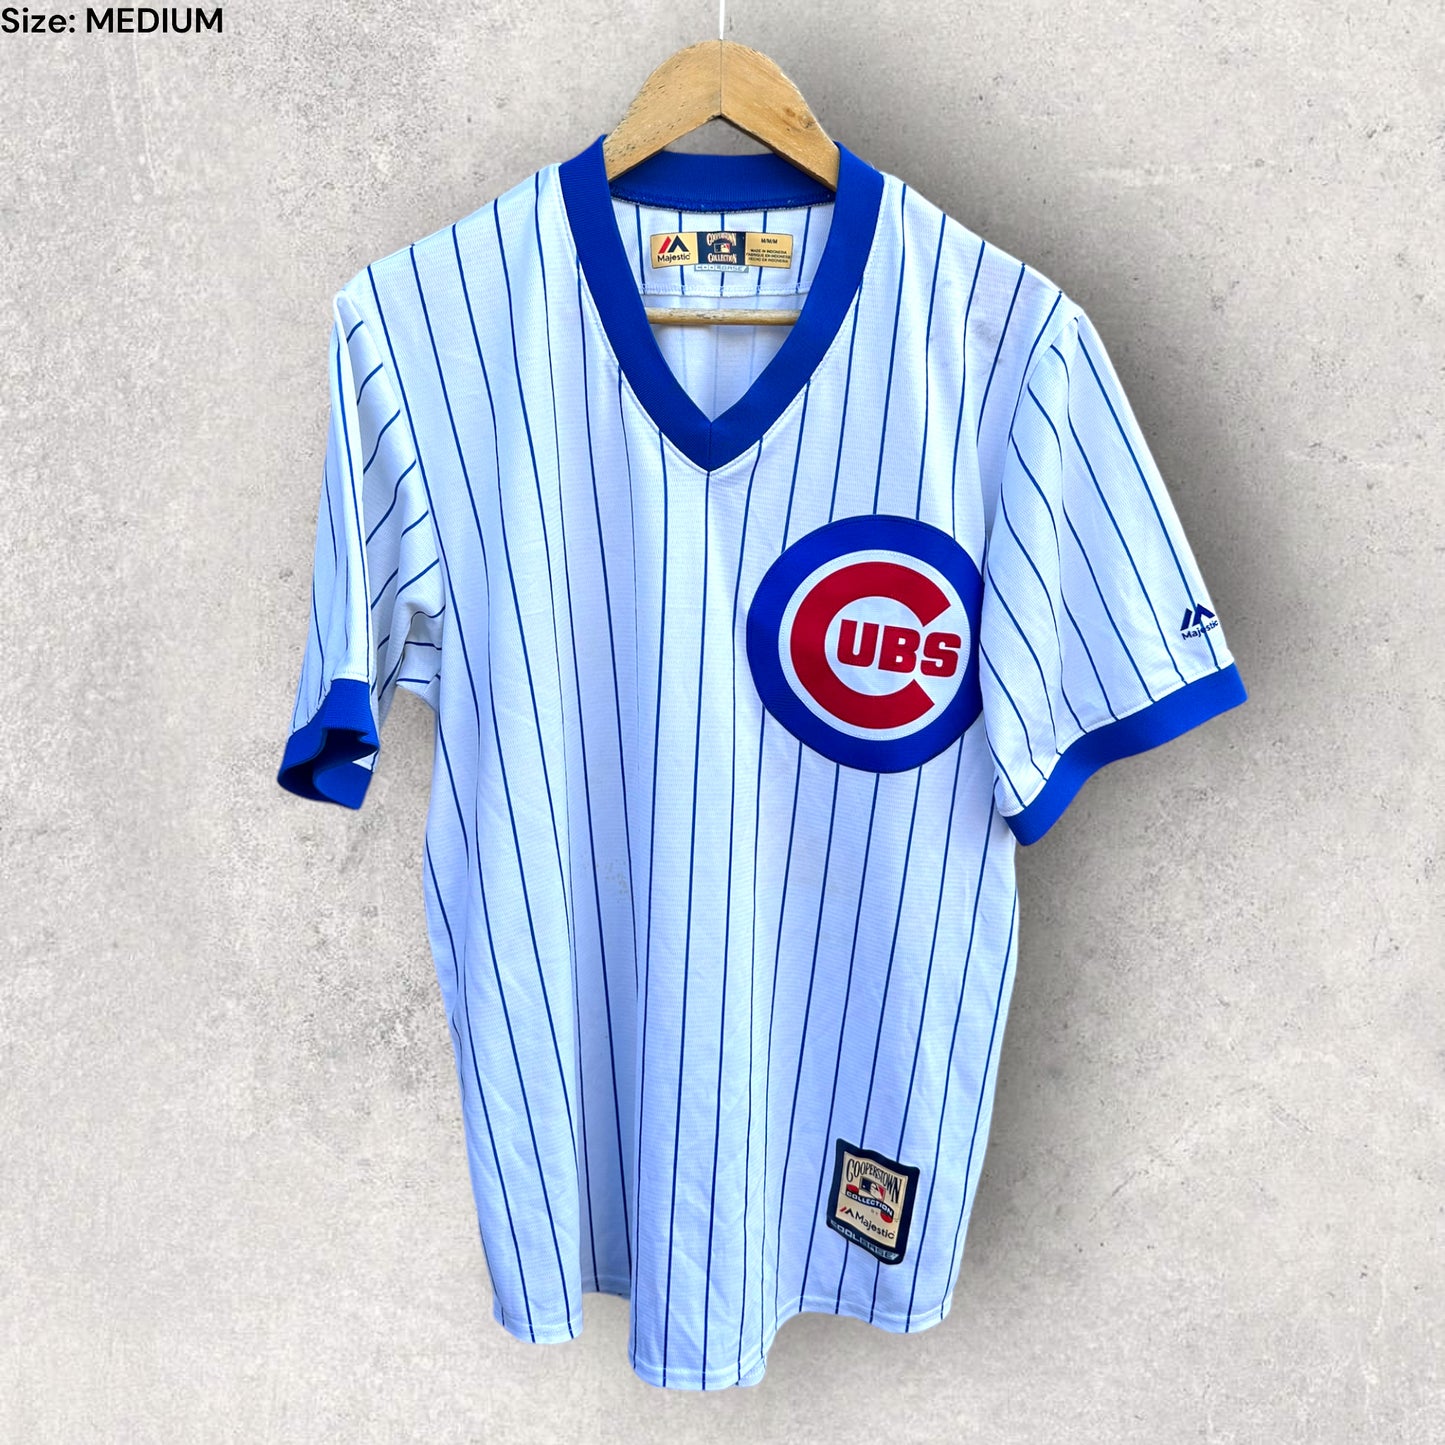 CHICAGO CUBS COOPERSTOWN BASEBALL JERSEY